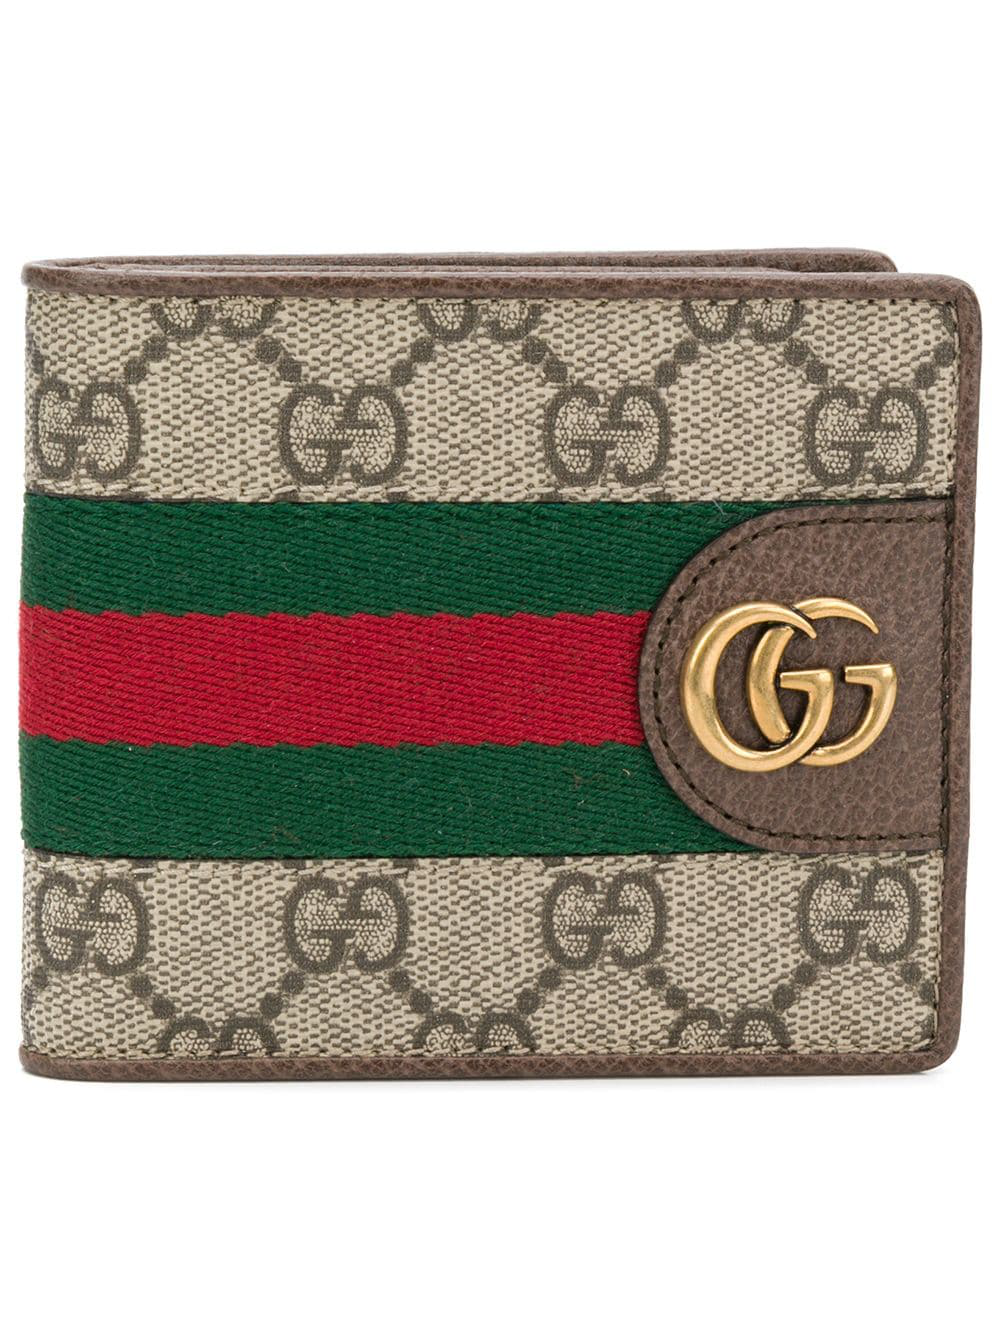 Gucci Wallet With Three Little Pigs In Neutrals | ModeSens